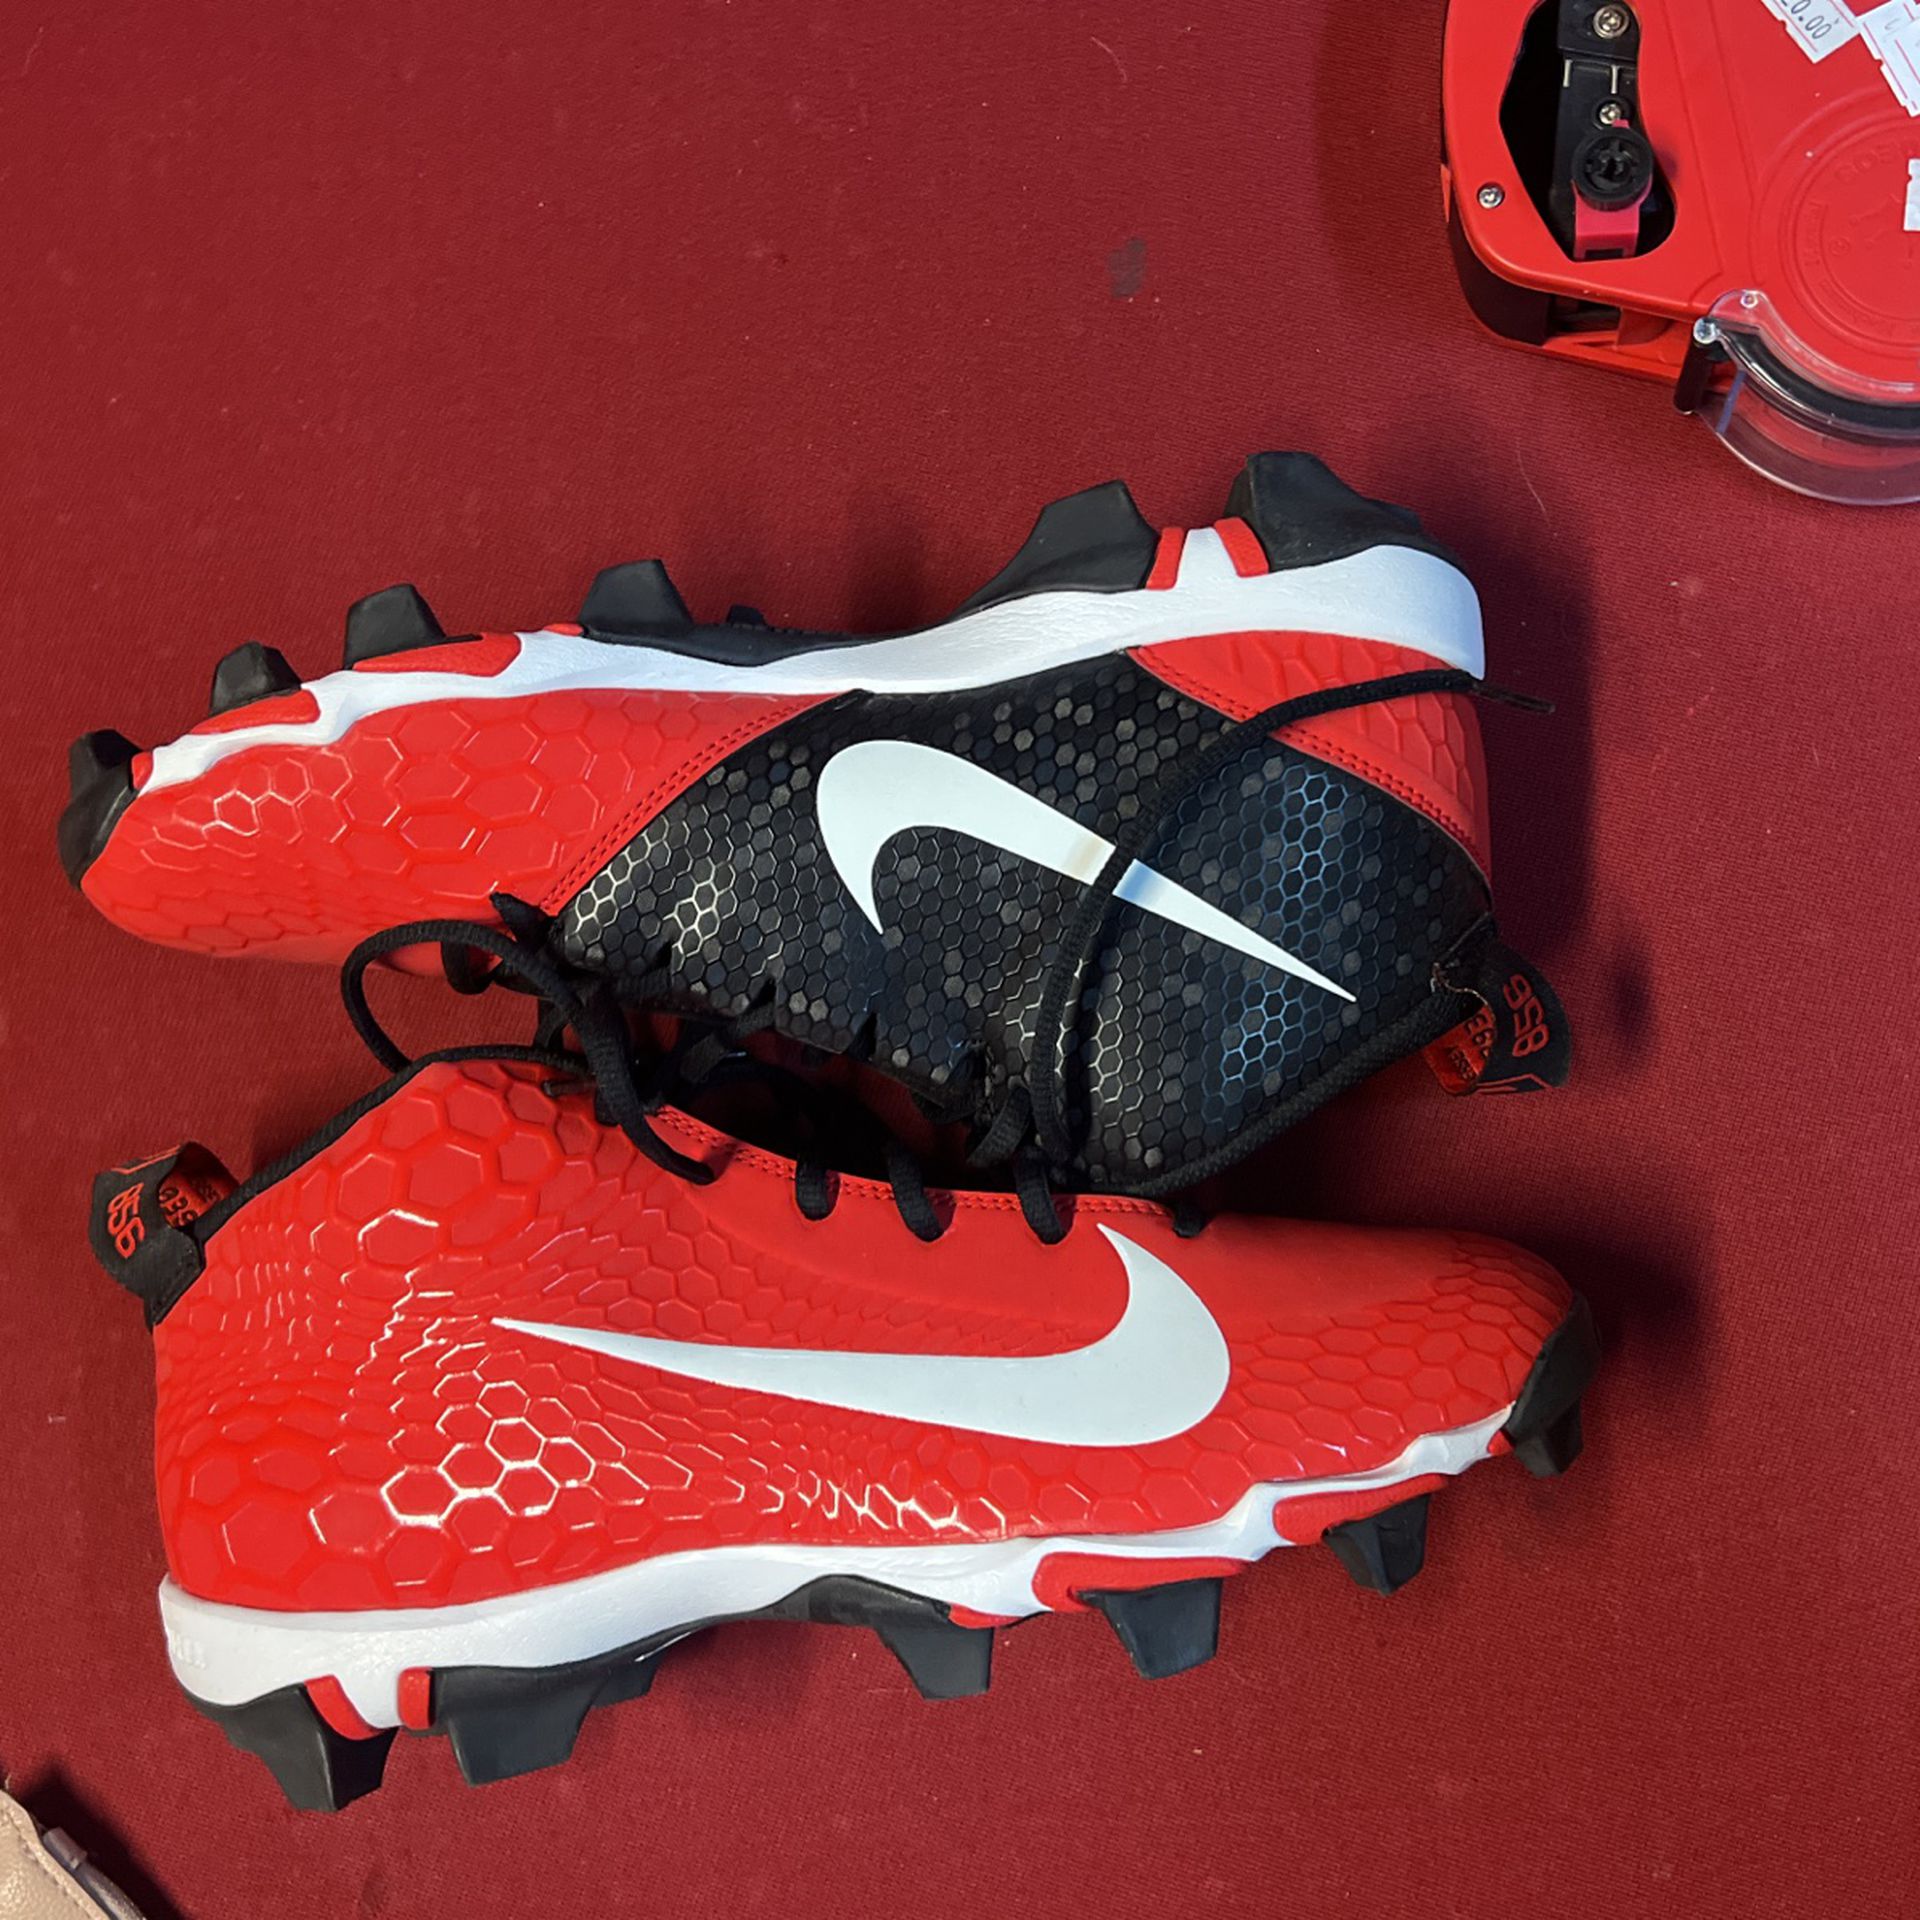 Nike Force Trout 5 Pro Keystone Baseball Cleats for Sale in San Diego, CA - OfferUp